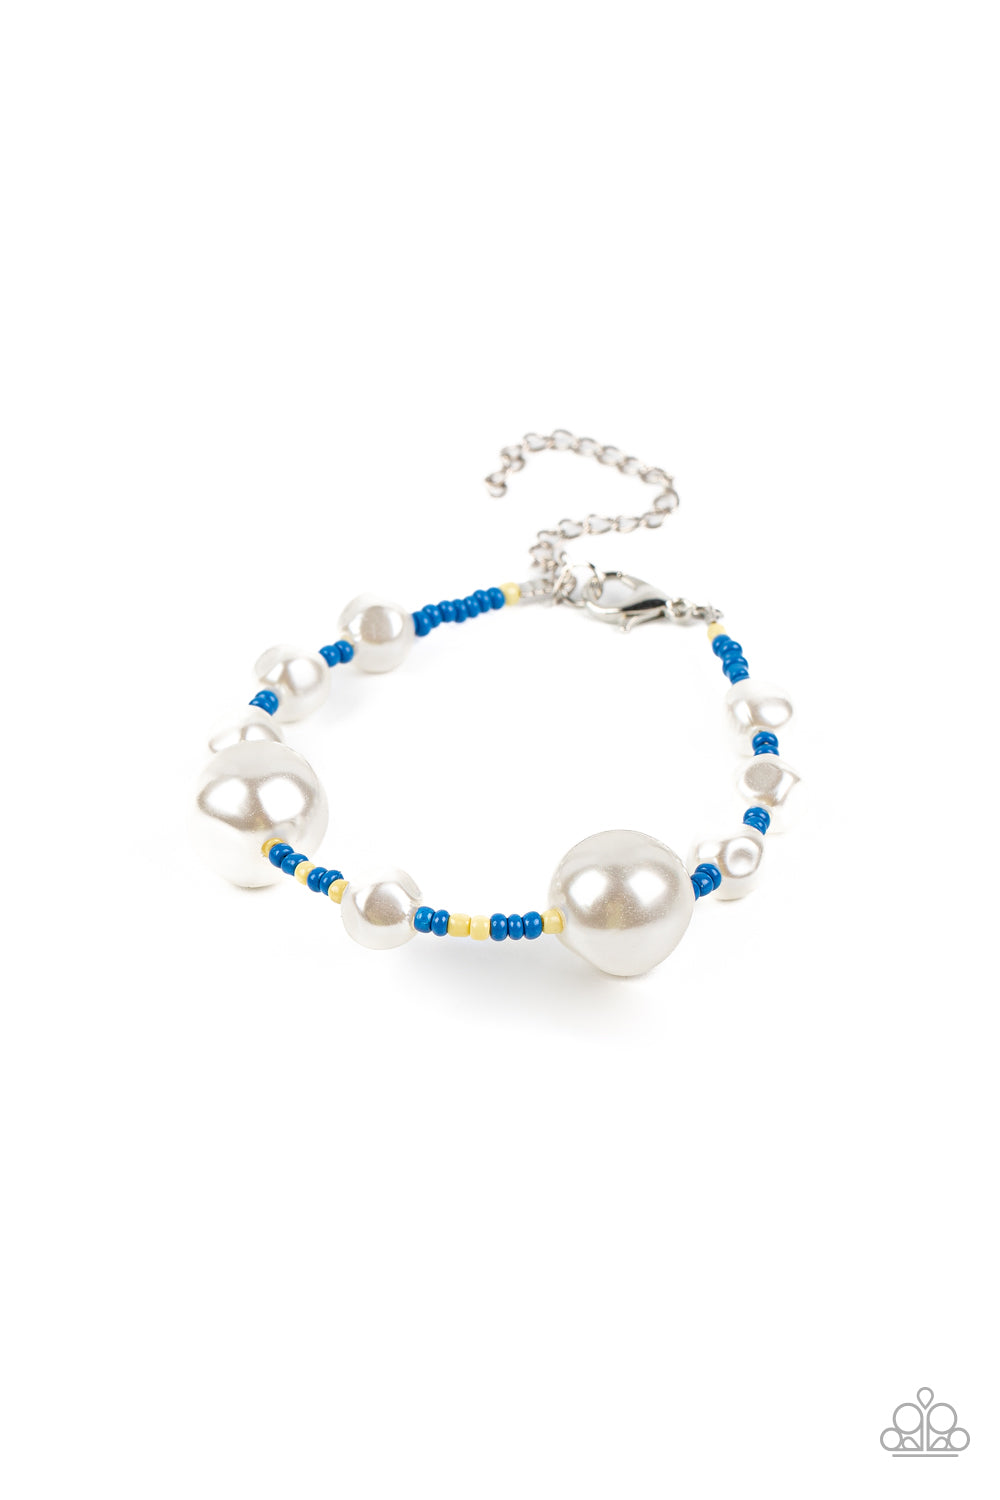 Contemporary Coastline - Blue Seedbead Bracelets rregular-shaped pearls in varying sizes are scattered amongst blue and yellow seed beads that are threaded along a wire, resulting in a refreshing and playful style around the wrist. Features an adjustable clasp closure.  Sold as one individual bracelet.  Get The Complete Look! Necklace: "Modern Marina - Blue" (Sold Separately